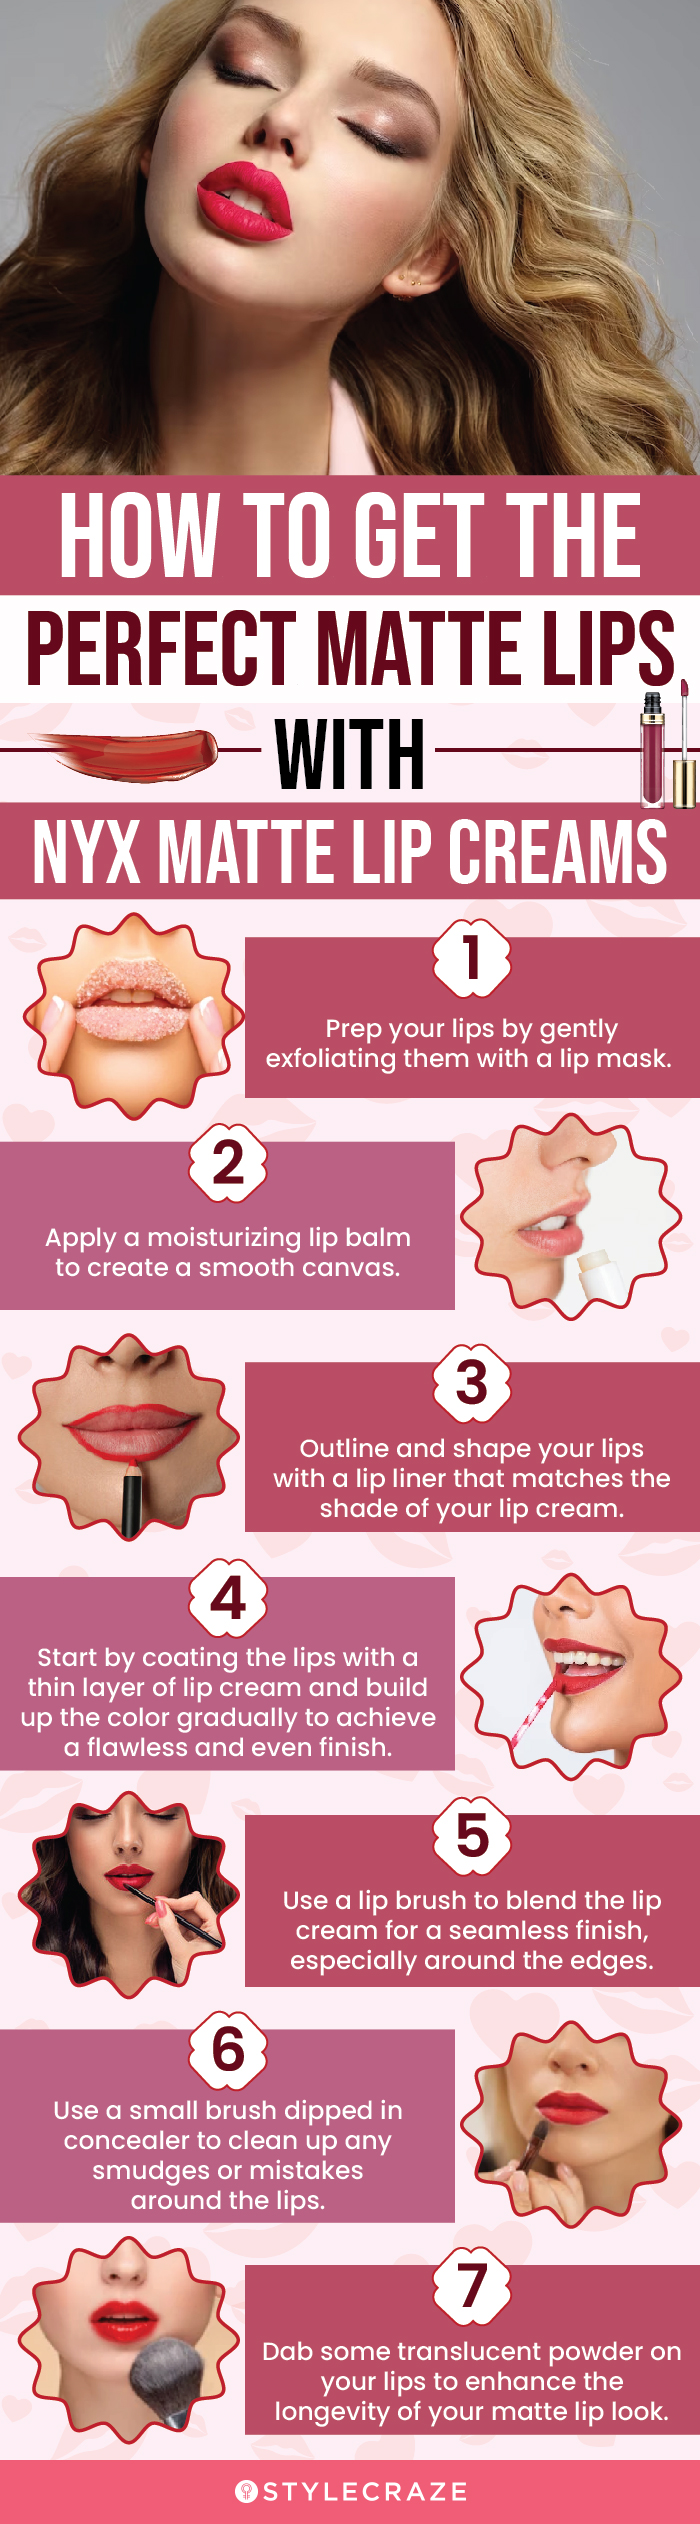 How To Get The Perfect Matte Lips With NYX Matte Lips Creams (infographic)